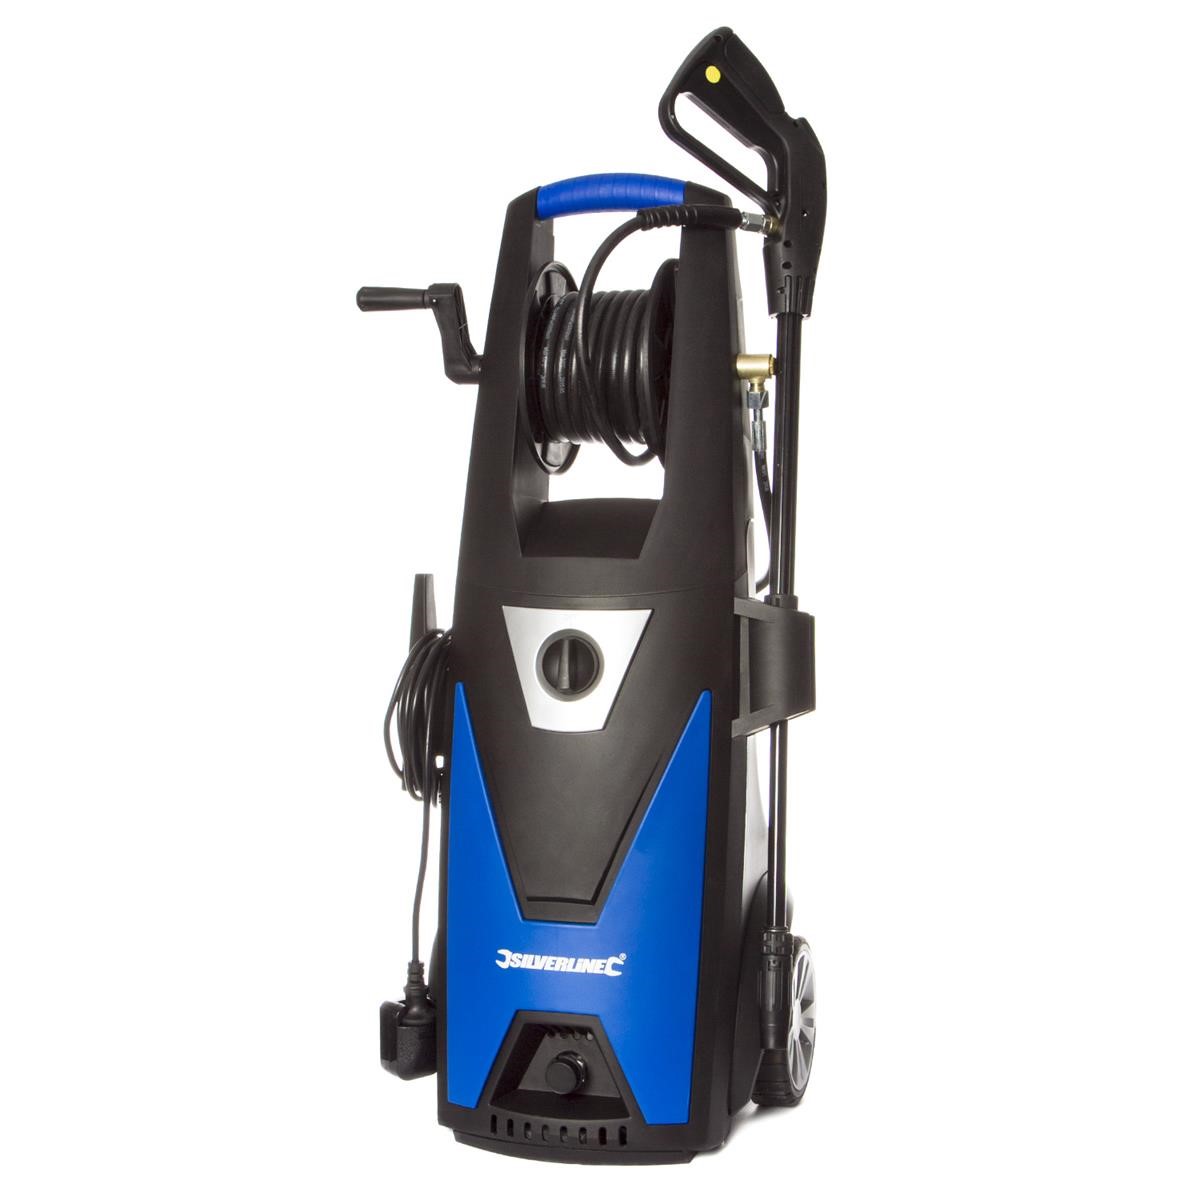 Silverline Pressure Washer  1800 W, max. 165 bar with hose reel